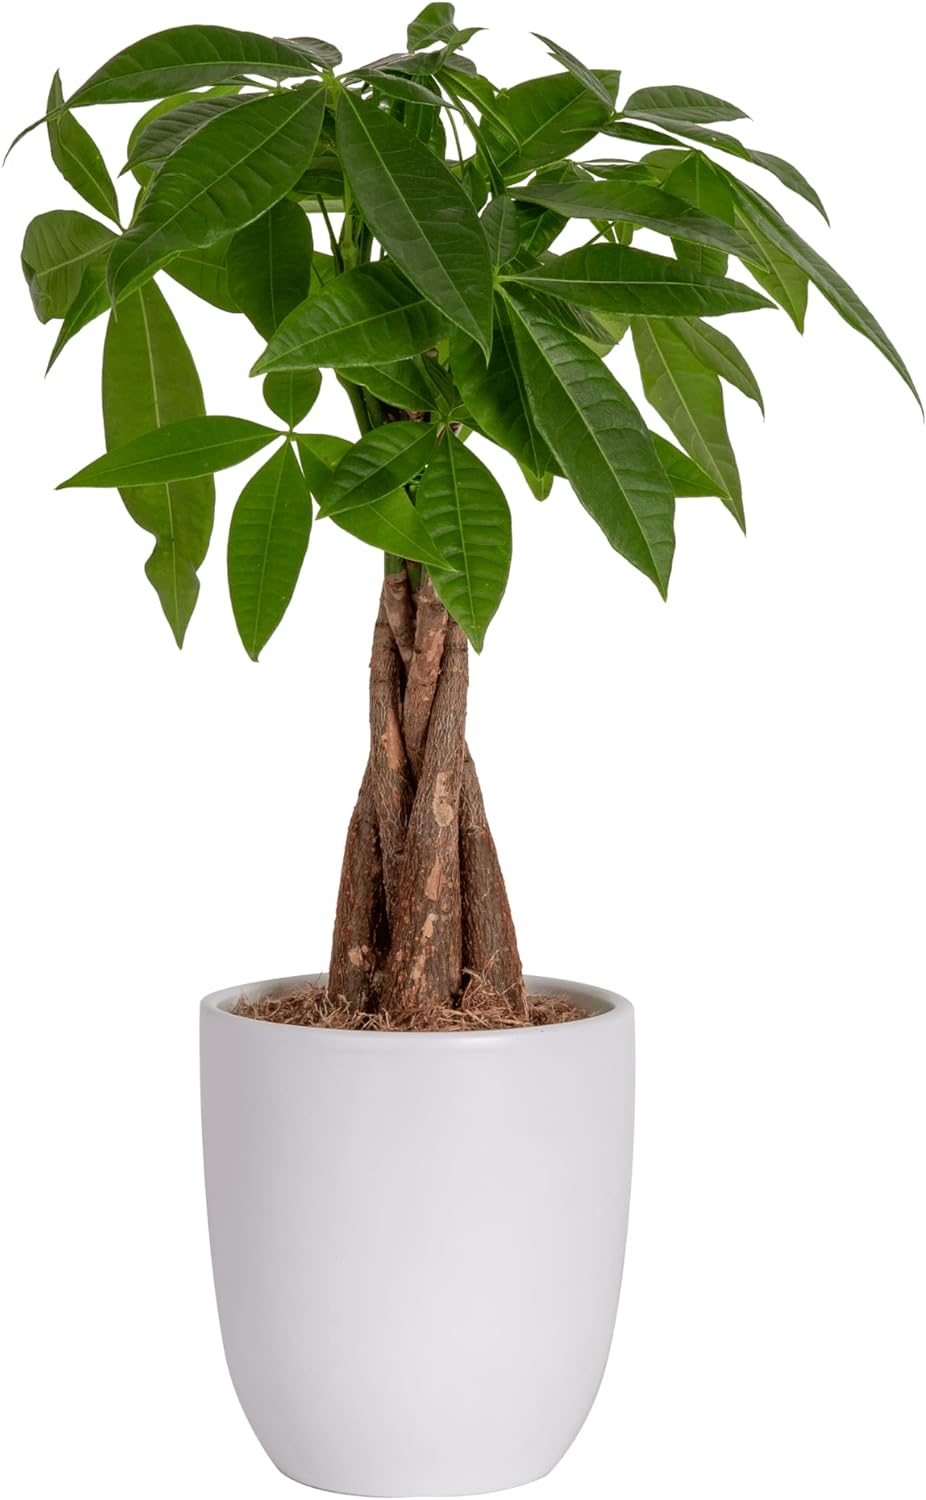 Costa Farms Money Tree Easy Care Indoor Plant Live Houseplant in Ceramic Planter Pot Bonsai Potted in Potting Soil Home Décor Birthday Gift New Home